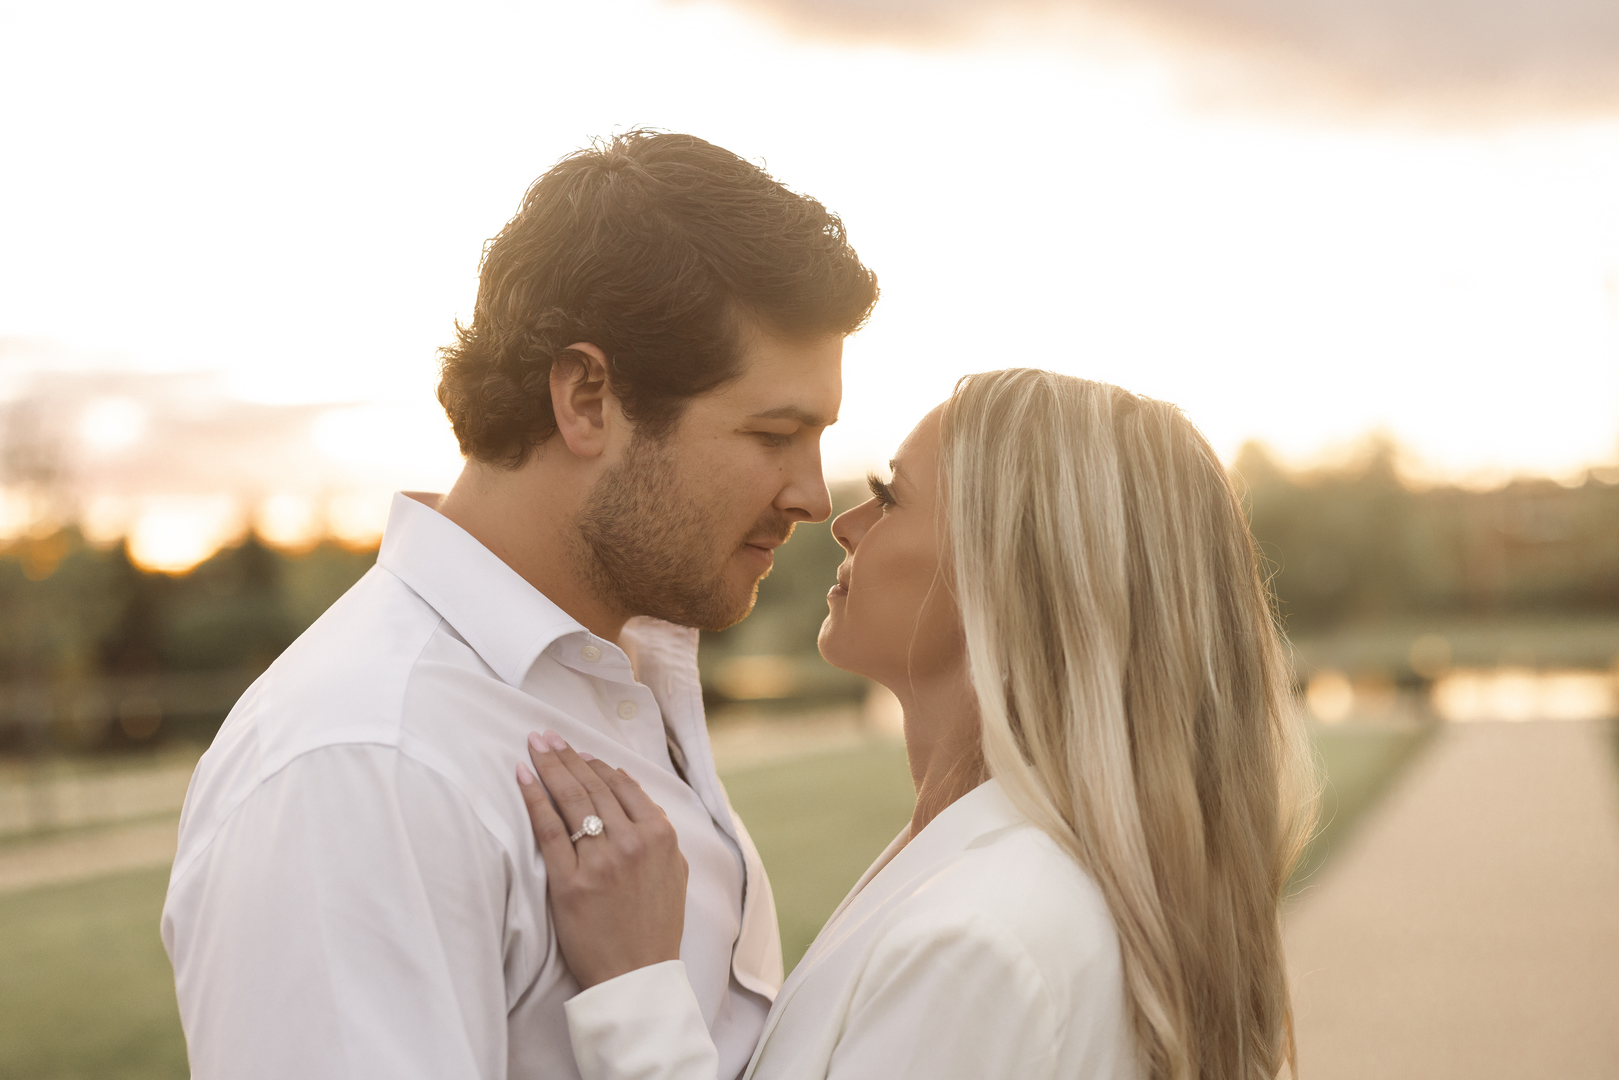 sunset portraits for young couple's engagement photos in bentonville